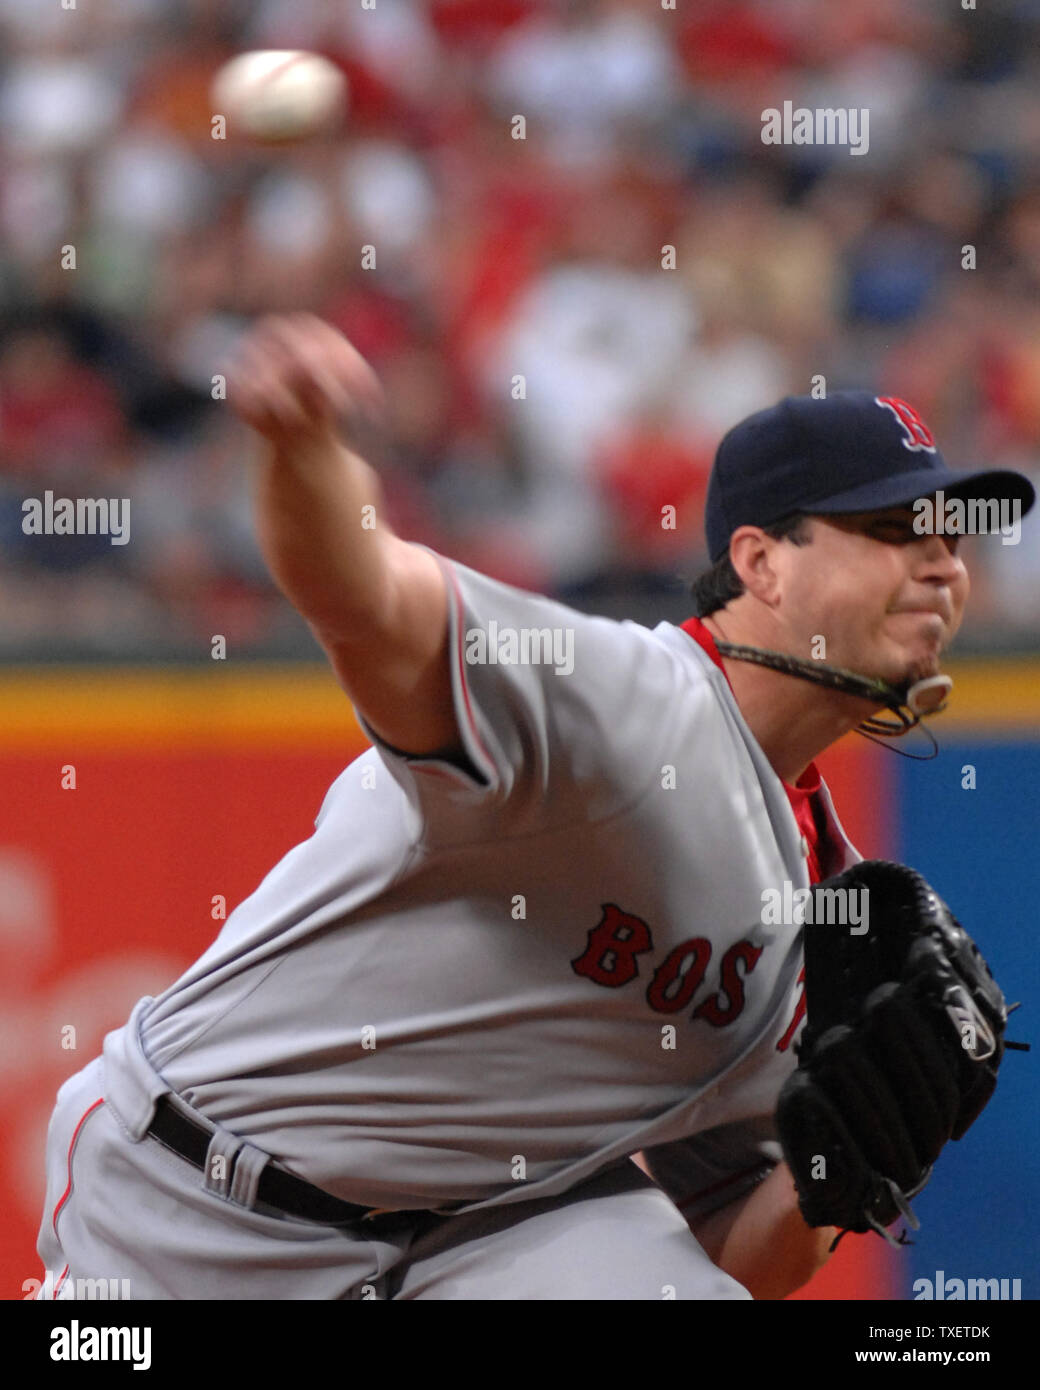 Boston Red Sox starting pitcher Josh Beckett throws against the Atlanta Braves in the first inning at Turner Field in Atlanta, June 19, 2007.  (UPI Photo/John Dickerson) Stock Photo